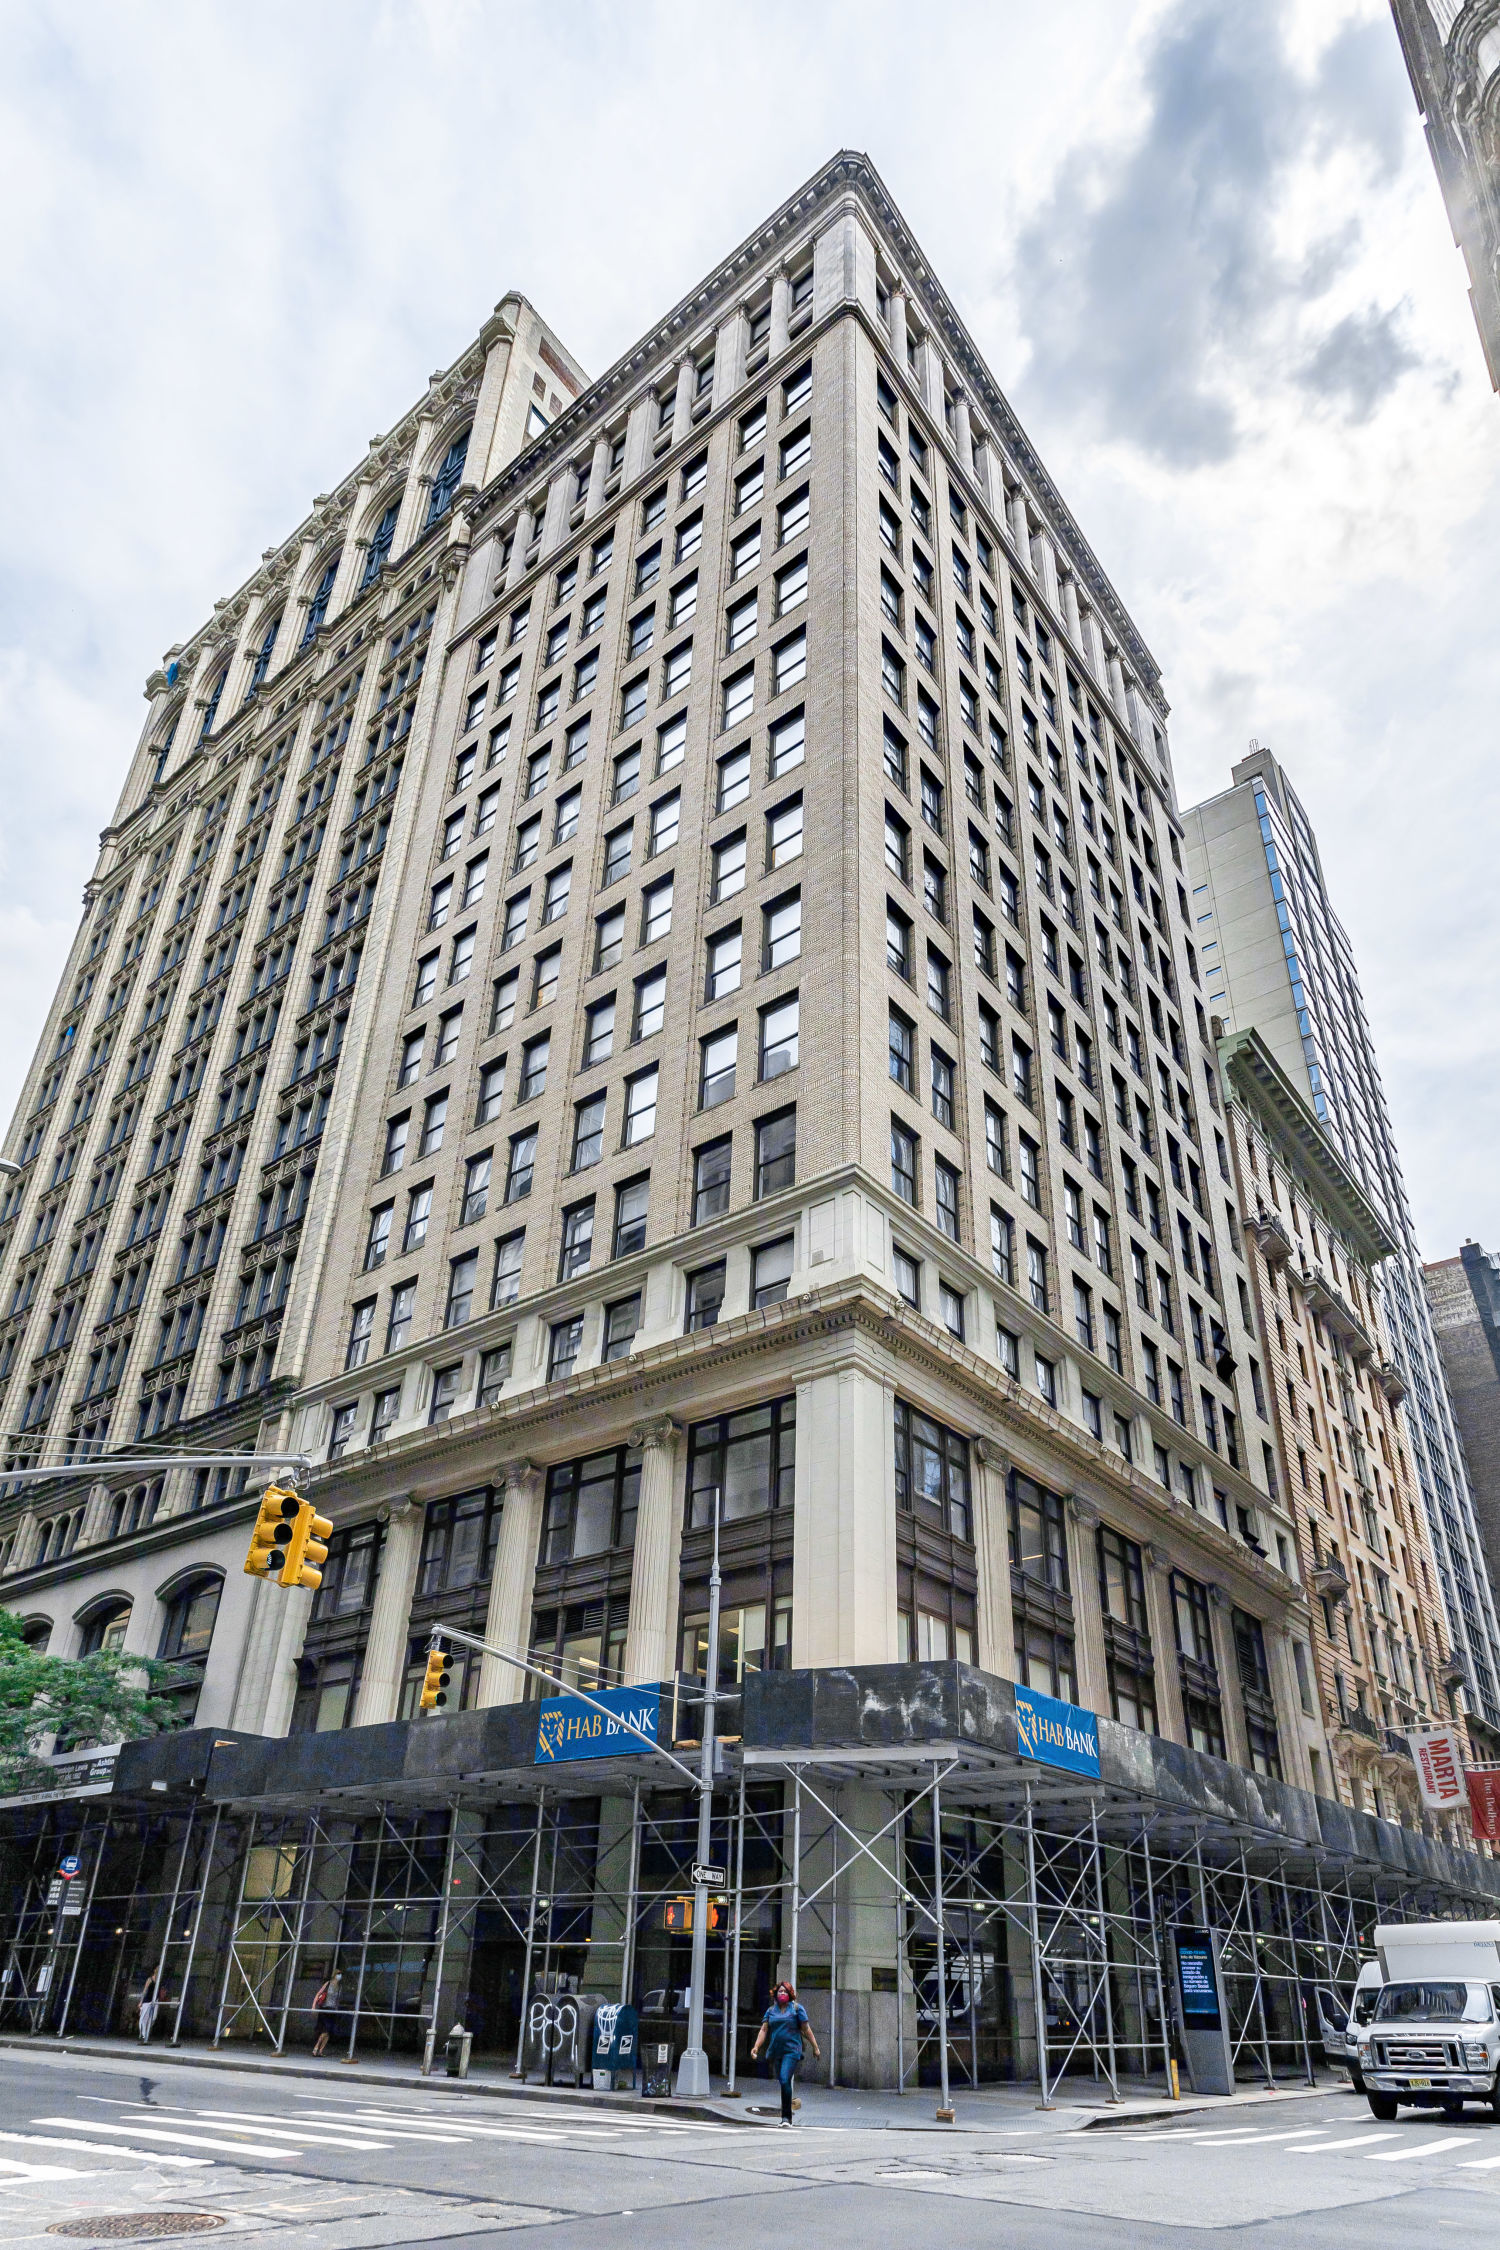 99 Madison Avenue, New York, NY Commercial Space for Rent | VTS